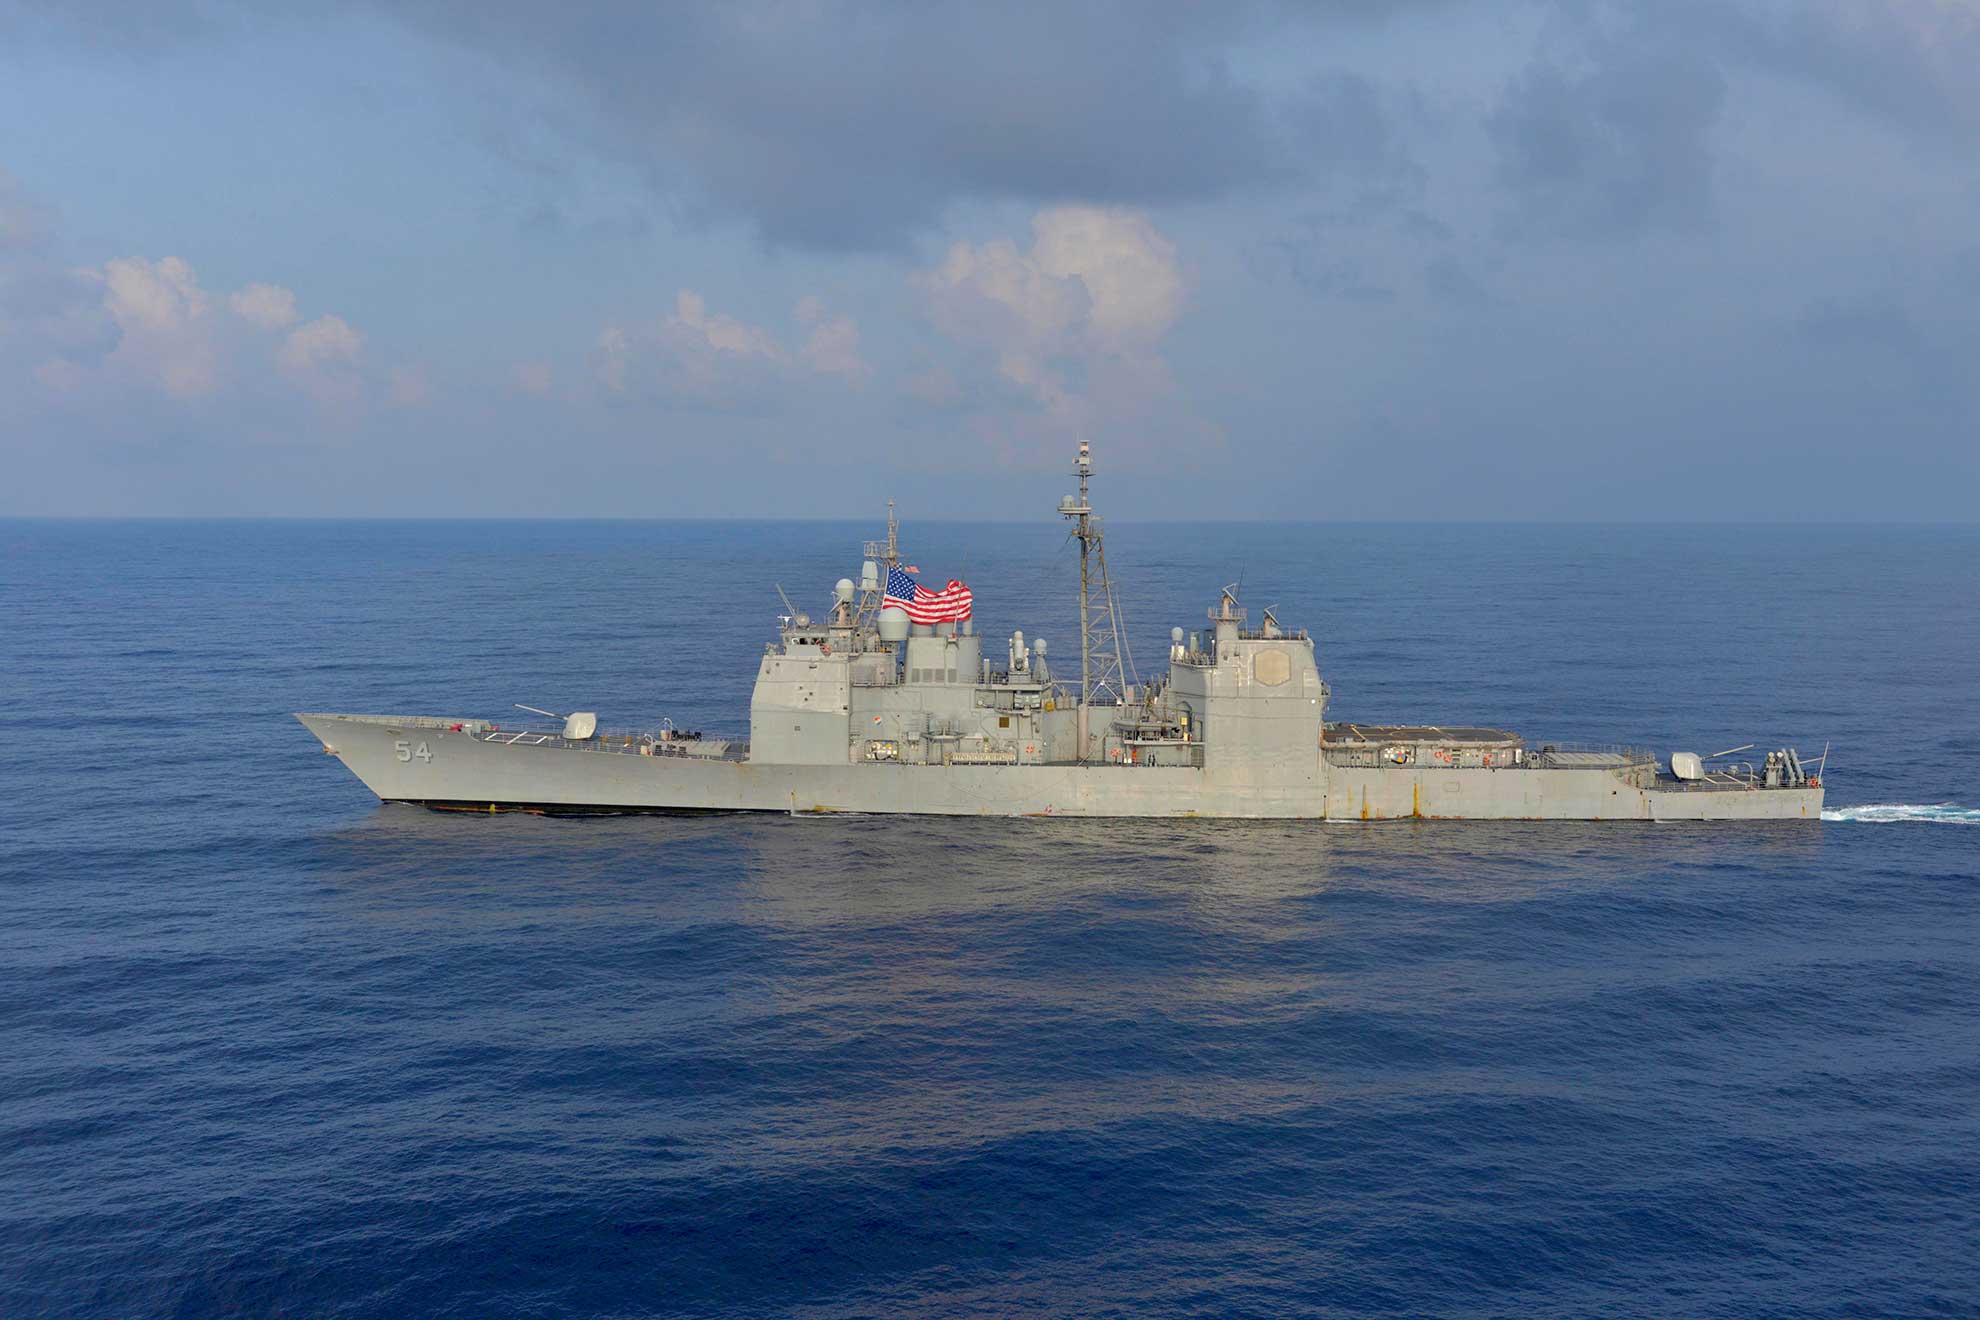 South China Sea (Aug. 31, 2018) The guided-missile cruiser USS Antietam (CG 54) is underway alongside the Navy's forward aircraft carrier USS Ronald Reagan (CVN 76) during a photo exercise with the Japan Maritime Self-Defense Force. The Ronald Reagan Carrier Strike Group is forward-deployed to the U.S. 7th Fleet area of operations in support of security and stability in the Indo-Pacific region -- U.S. Navy photo by MCS1Timothy M. Black. -